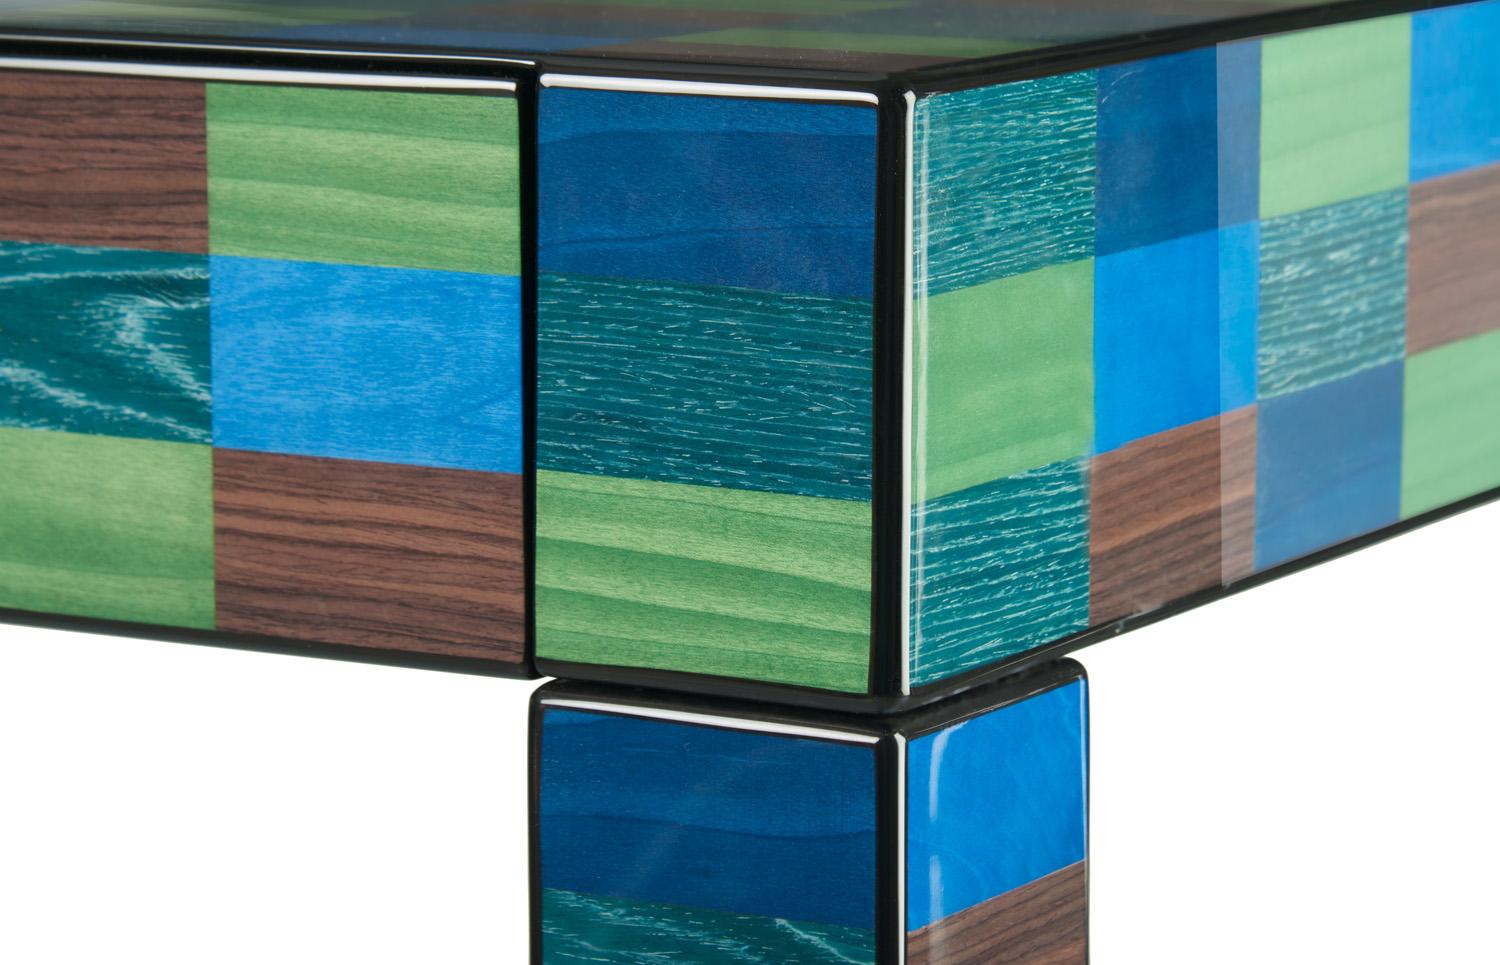 A striking sculptural objet d'art that doubles as a console, this stunning piece will add color and cheer to any modern or eclectic entryway. A bold design of strong geometric value, it is handcrafted of wood entirely veneered with an inlay of